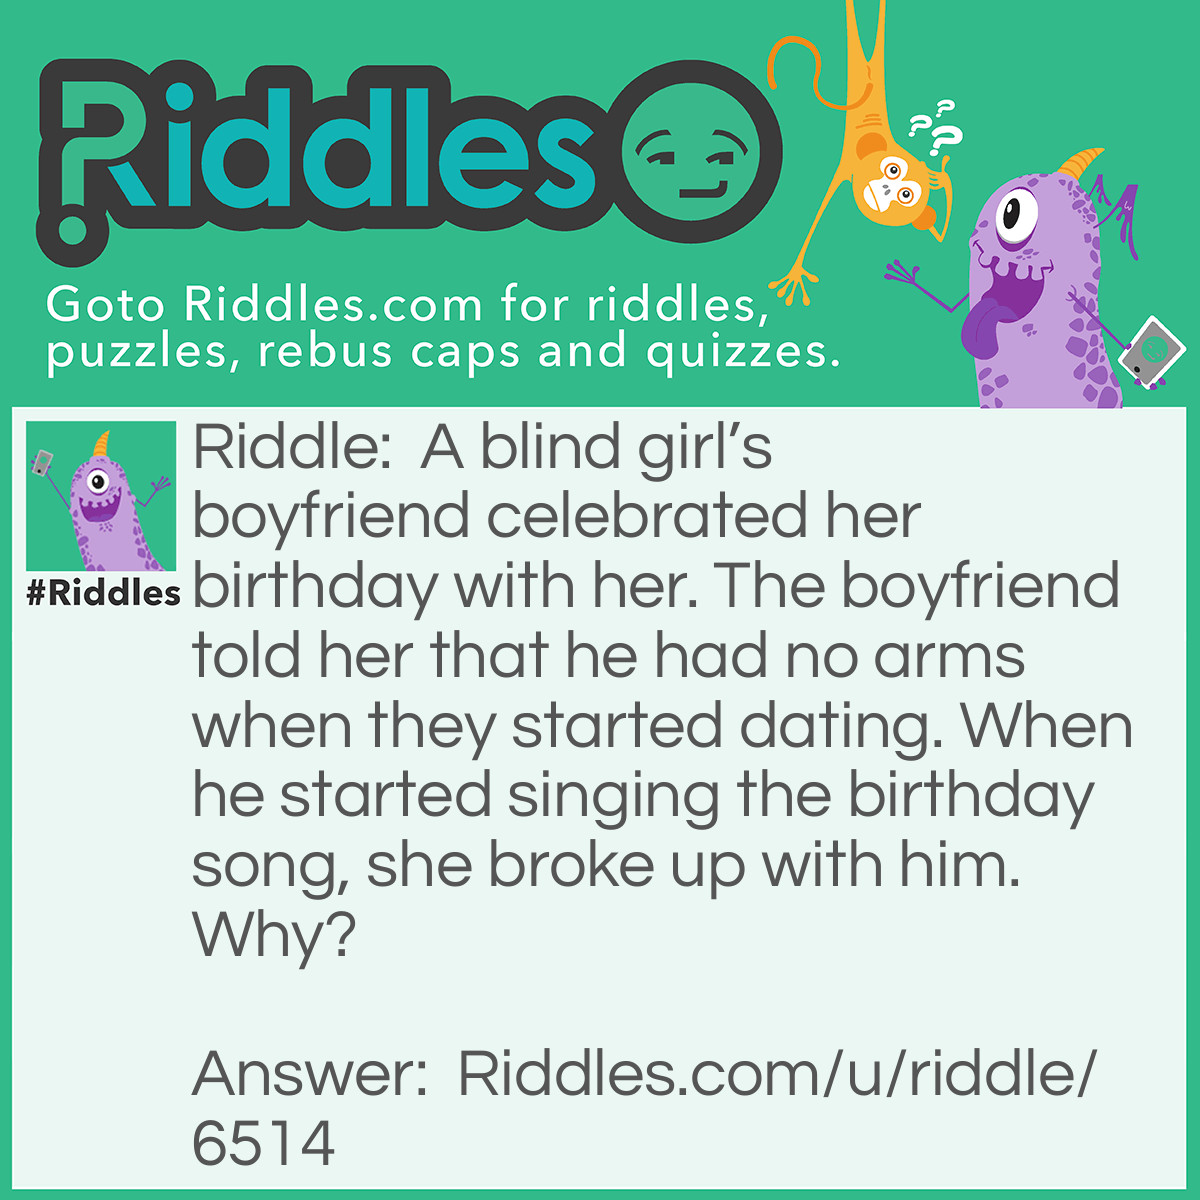 Riddle: A blind girl's boyfriend celebrated her birthday with her. The boyfriend told her that he had no arms when they started dating. When he started singing the birthday song, she broke up with him. Why? Answer: He clapped while singing her birthday song. If he did not have any arms, he would not have been able to clap. Therefore, the girl realised that he lied to her about him not having any arms and broke up with him.